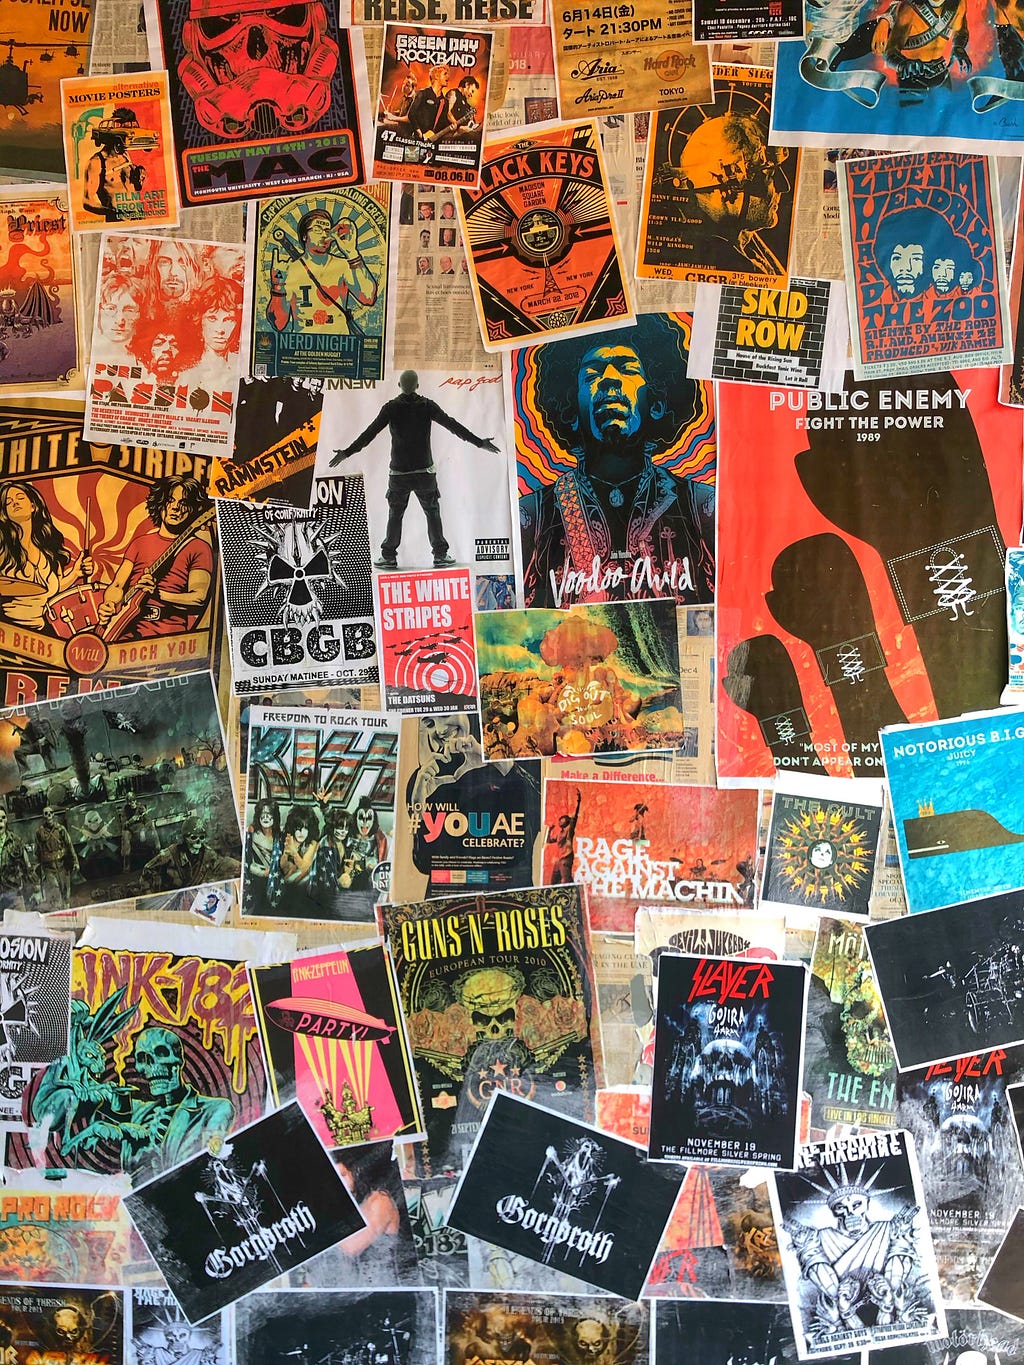 A collage of colour posters and images.